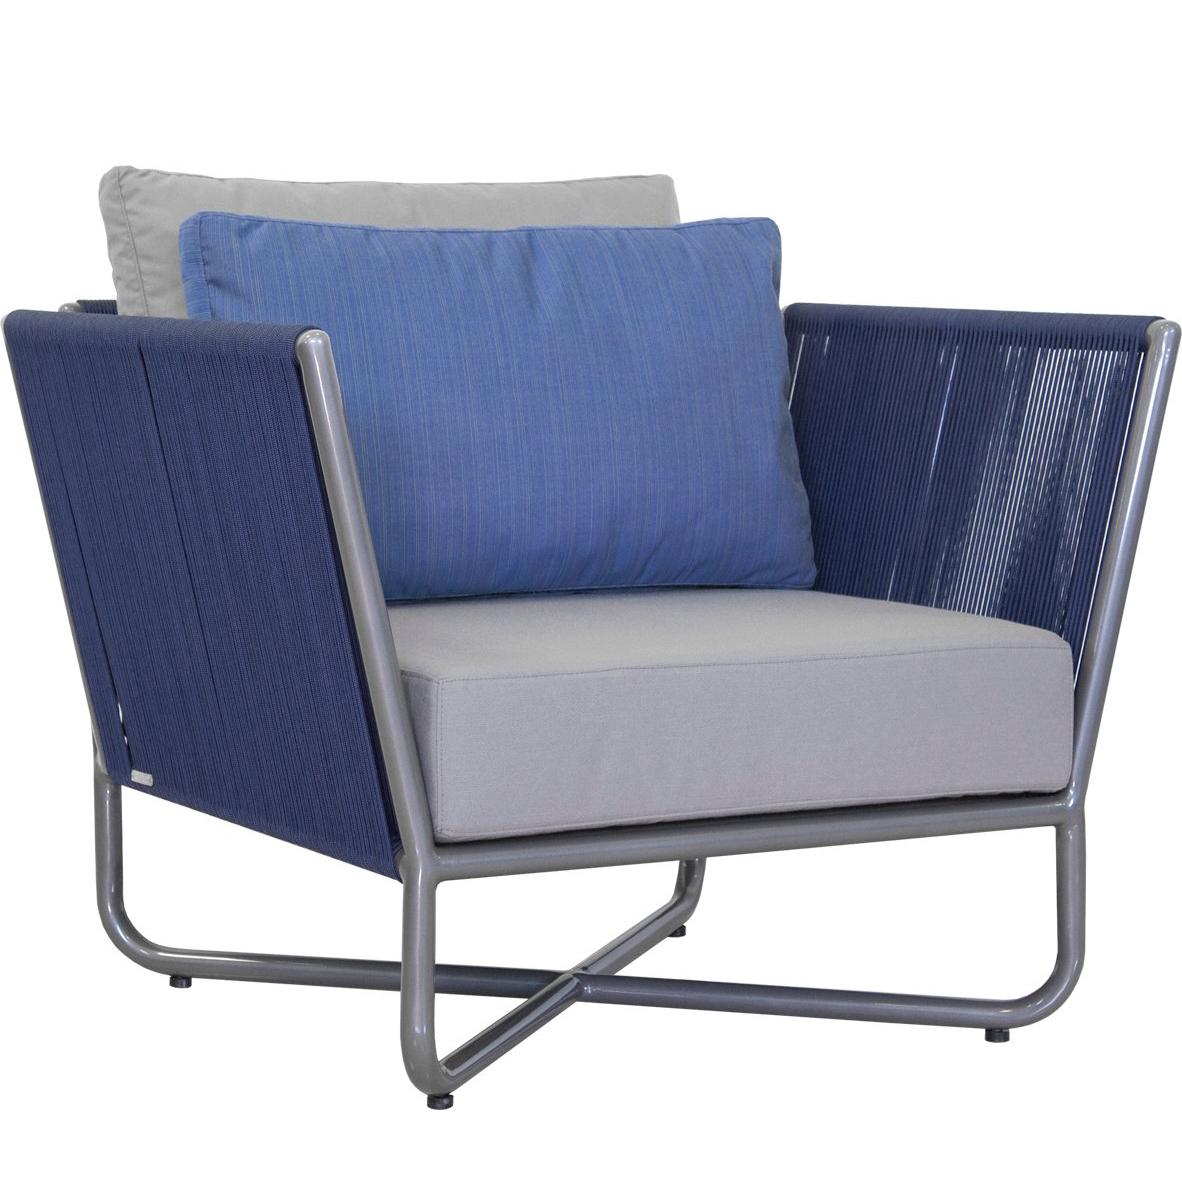 Minimalist Modern Outdoor Armchair, Metal with Nautical Rope Pattern